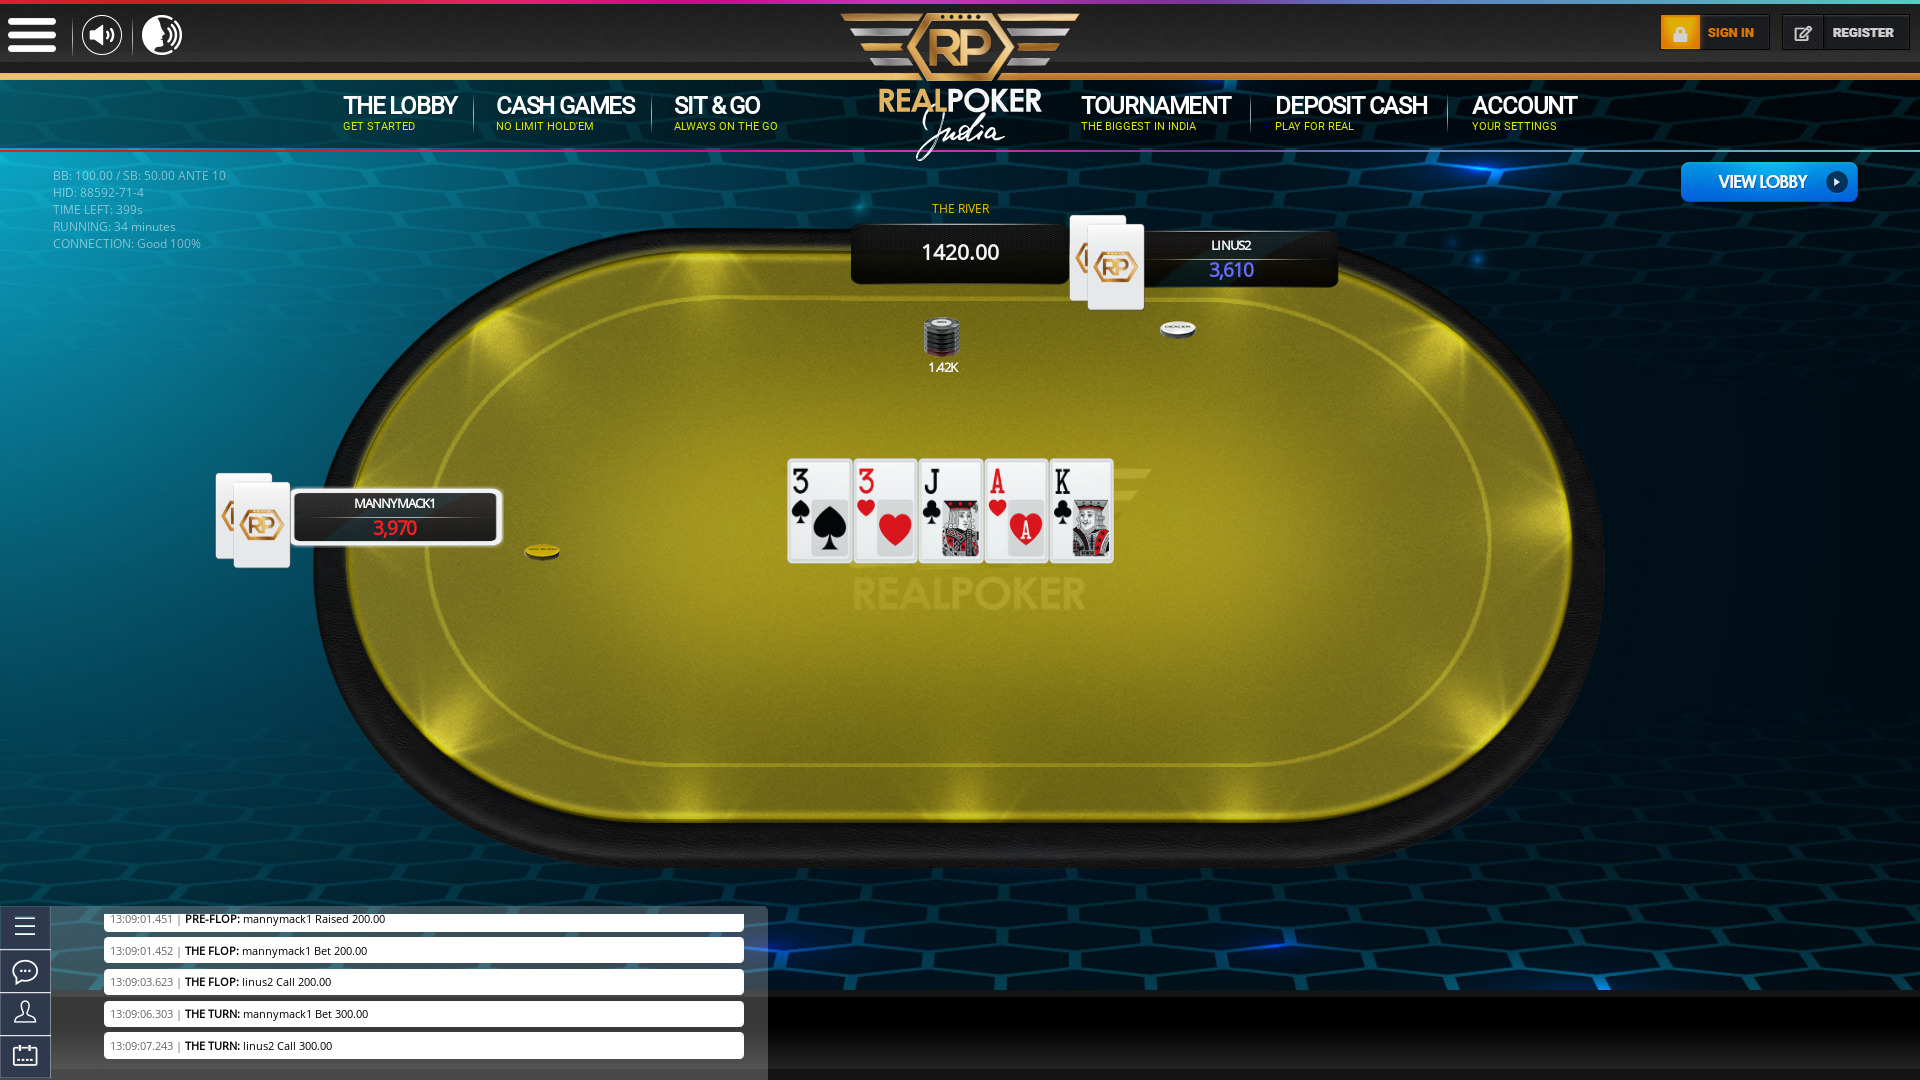 Online poker on a 6 player table in the 33rd minute match up